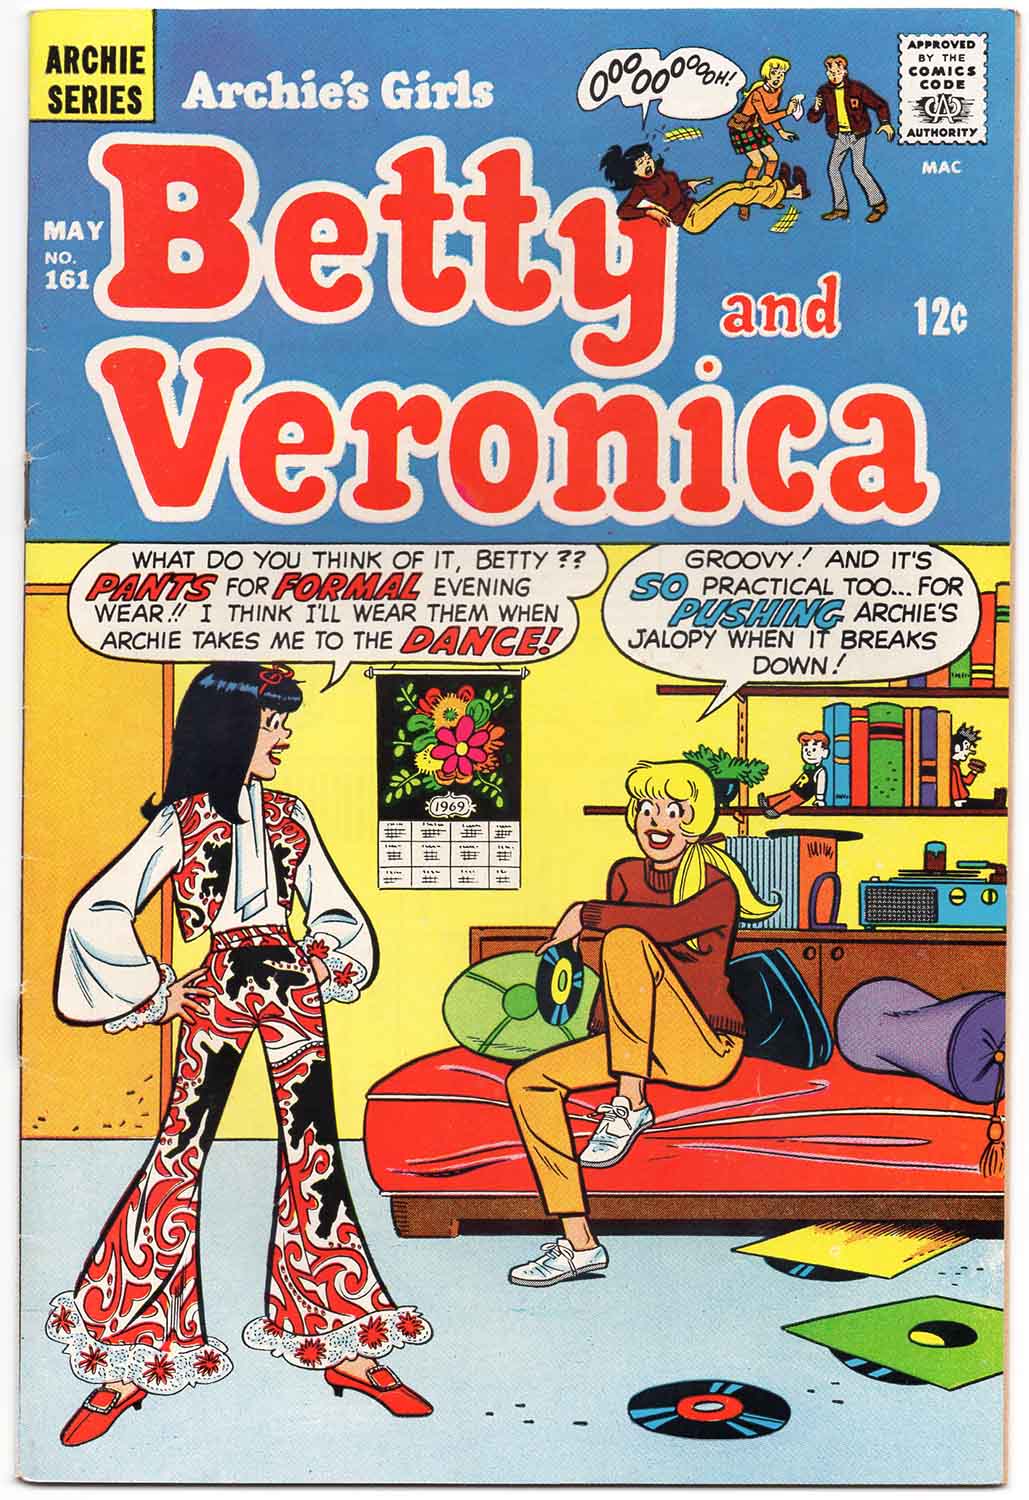 Betty and Veronica #161